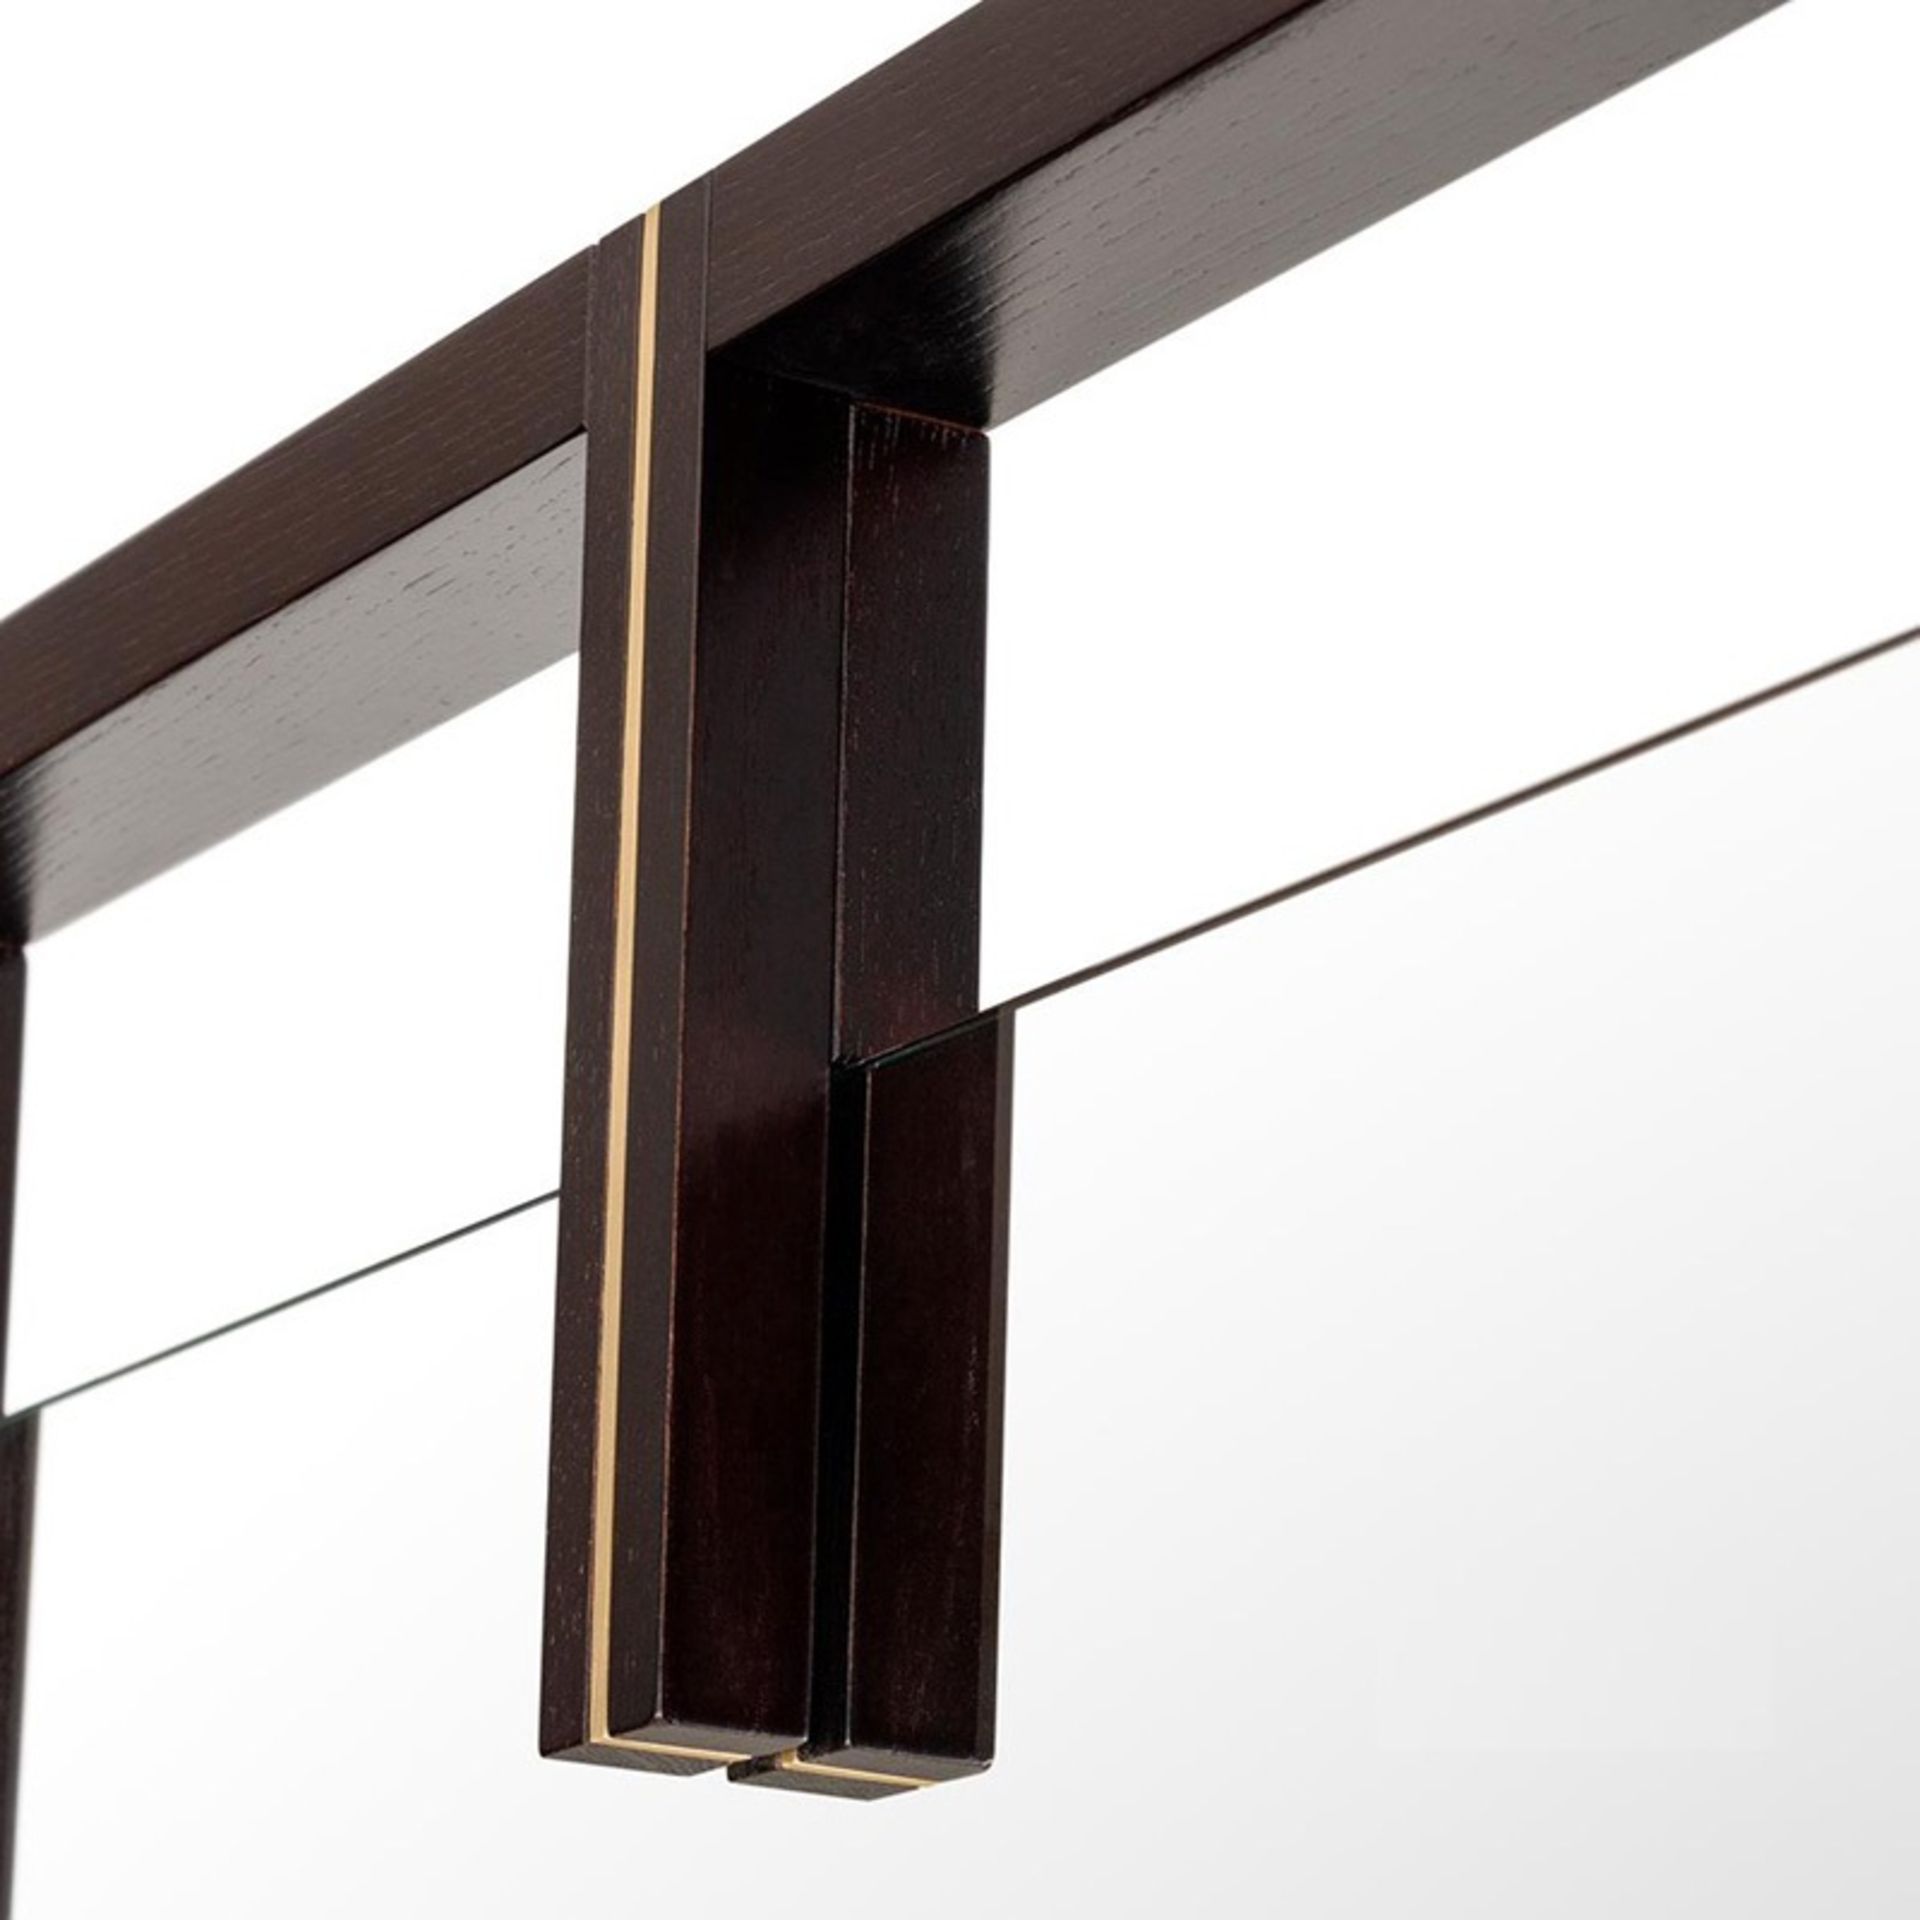 1 x FRATO Lancaster Luxury Mirror With Dark Wood Frame And Brushed Brass Details - RRP £1,288 - Image 4 of 7